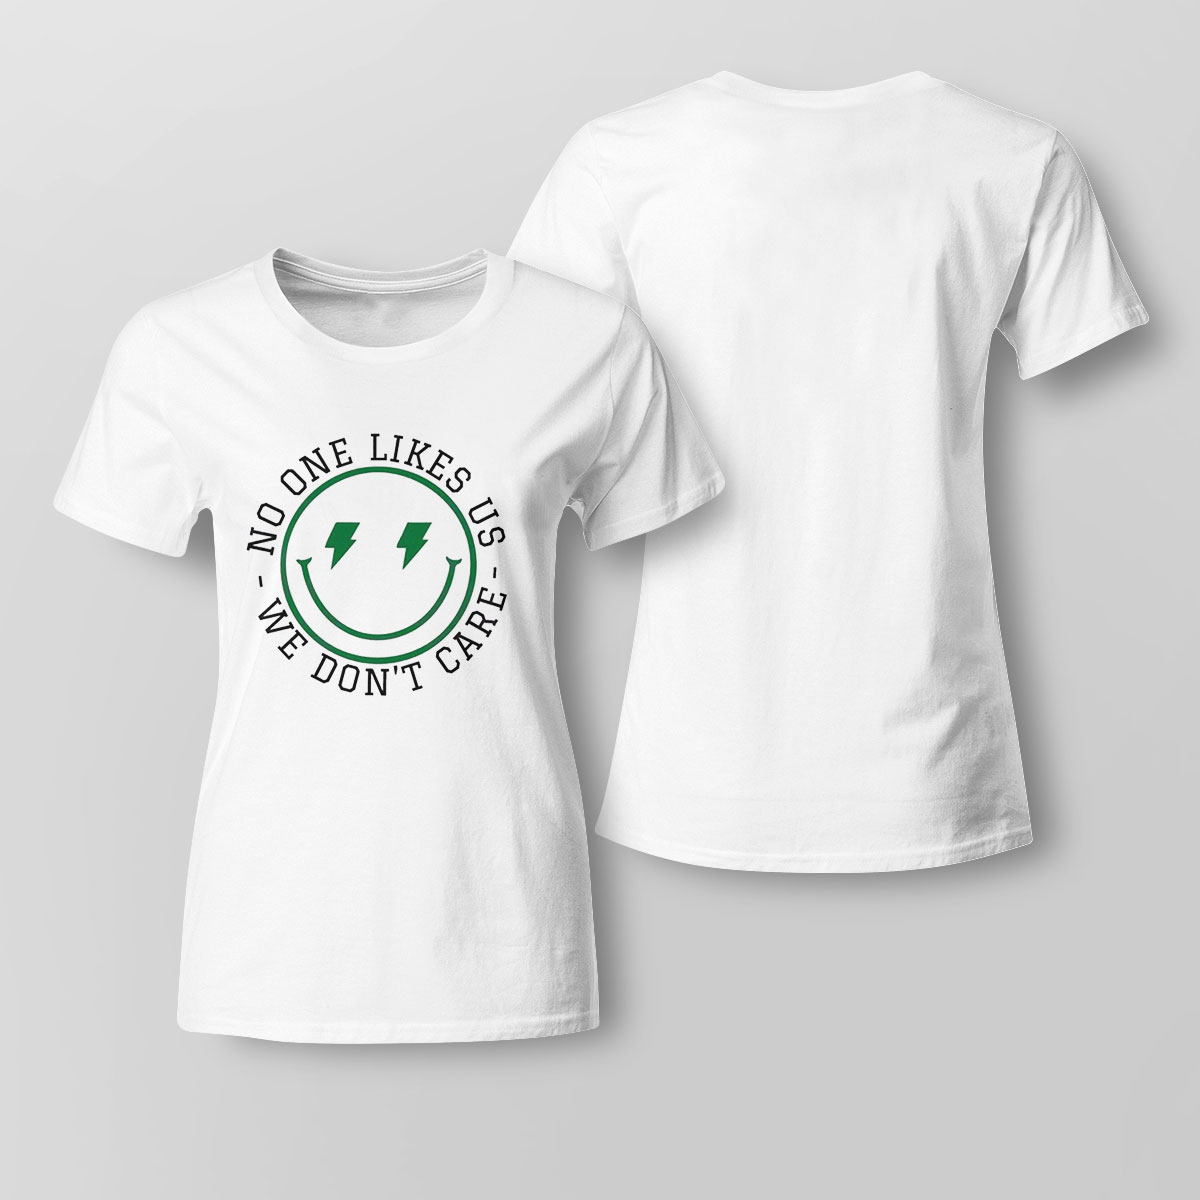 No One Like Us We Dont Care Smiley Face Funny Eagles Fans Shirt Ladies Tee